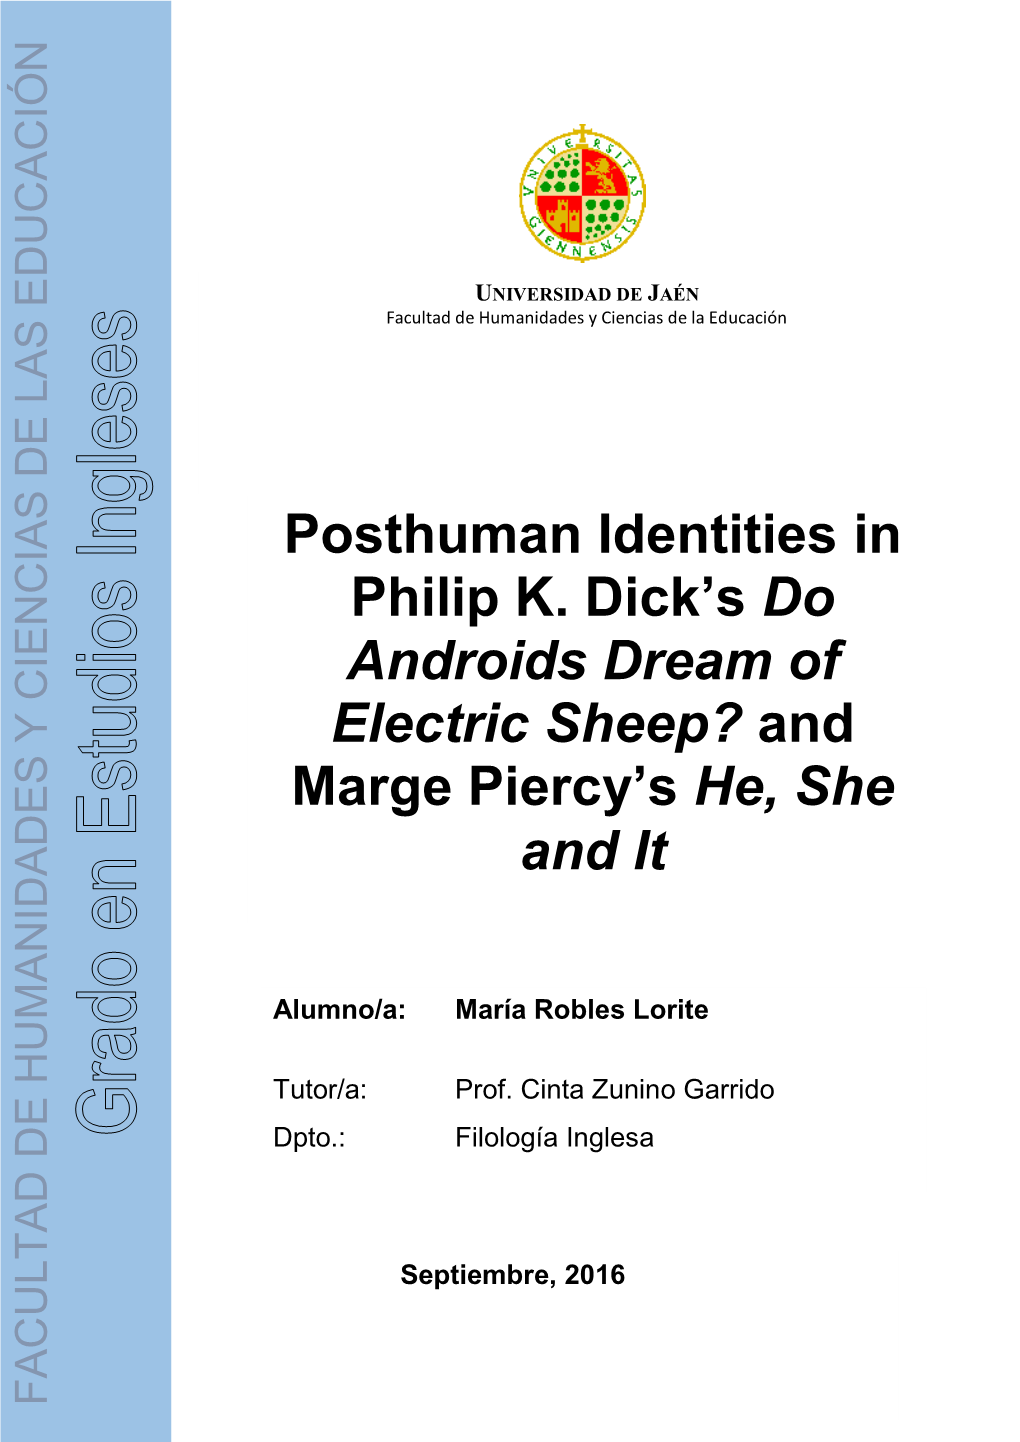 Posthuman Identities in Philip K. Dick's Do Androids Dream of Electric Sheep? and Marge Piercy's He, She and It